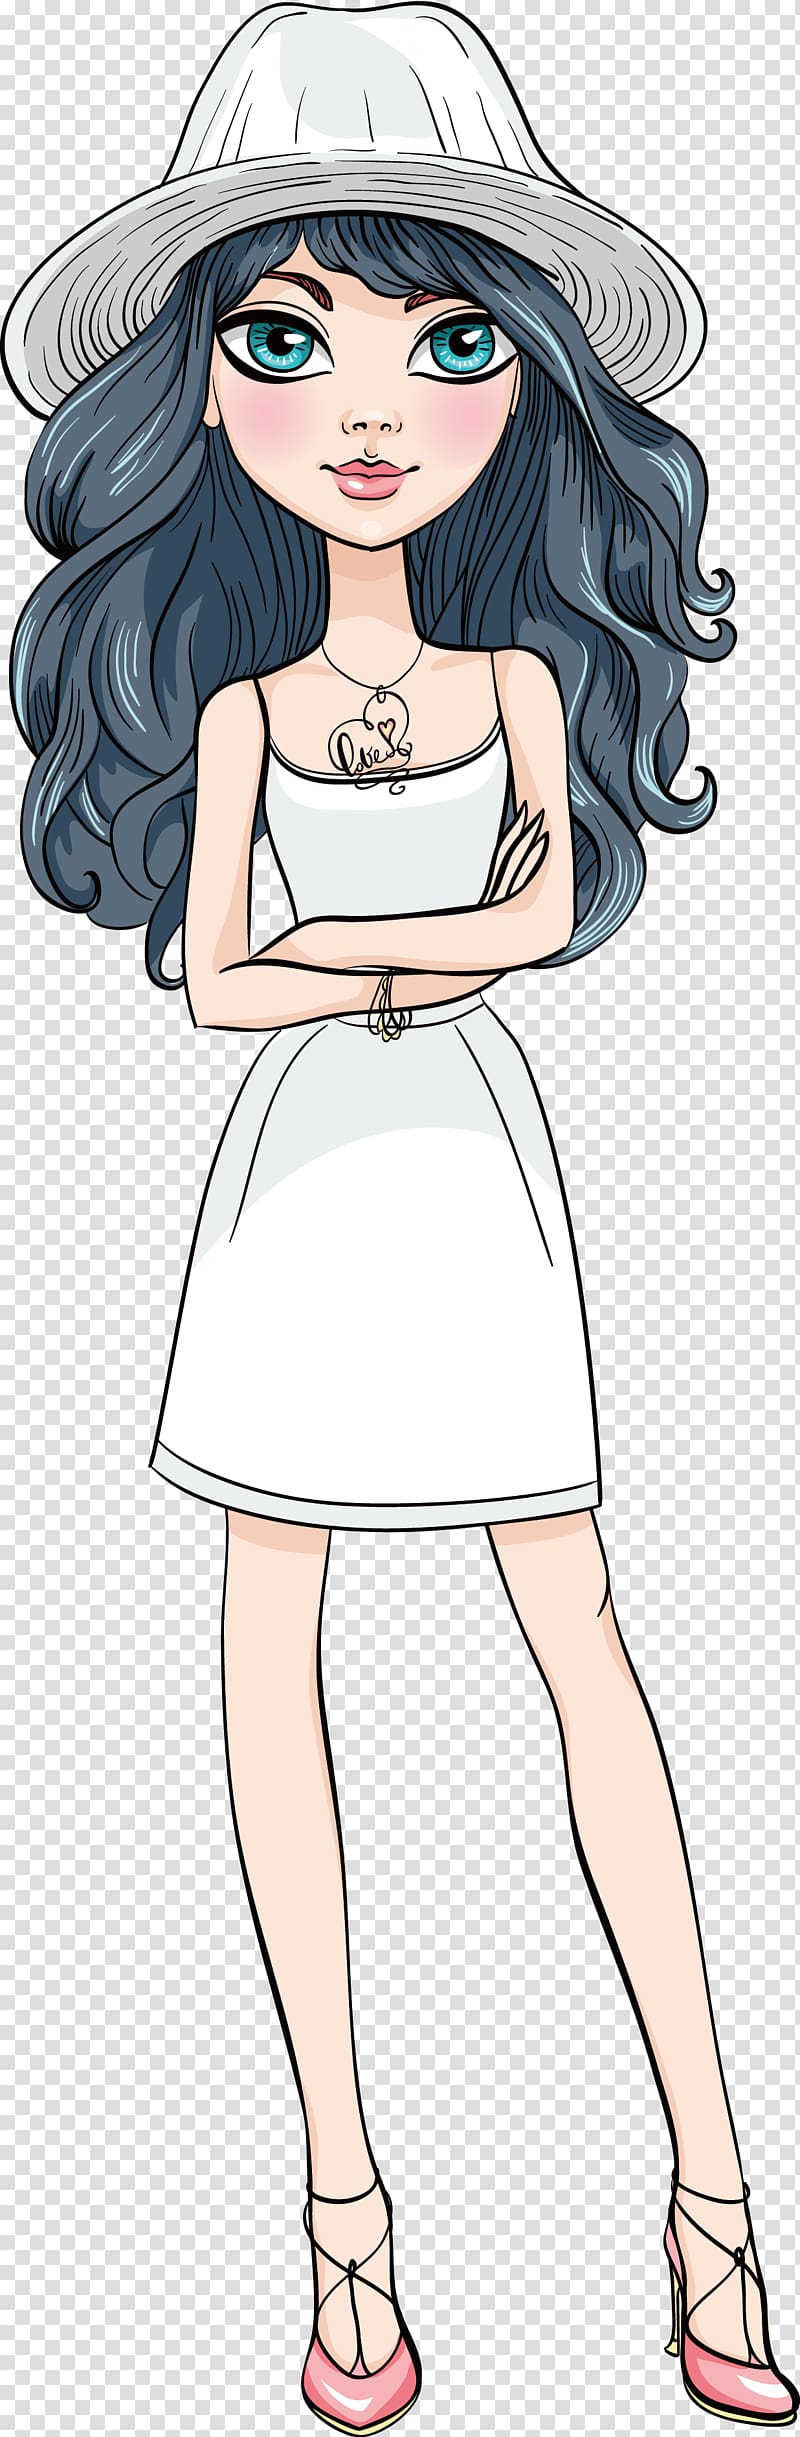 woman in white sundress wearing white sunhat , Girl Fashion Illustration, Summer girl with cap transparent background PNG clipart